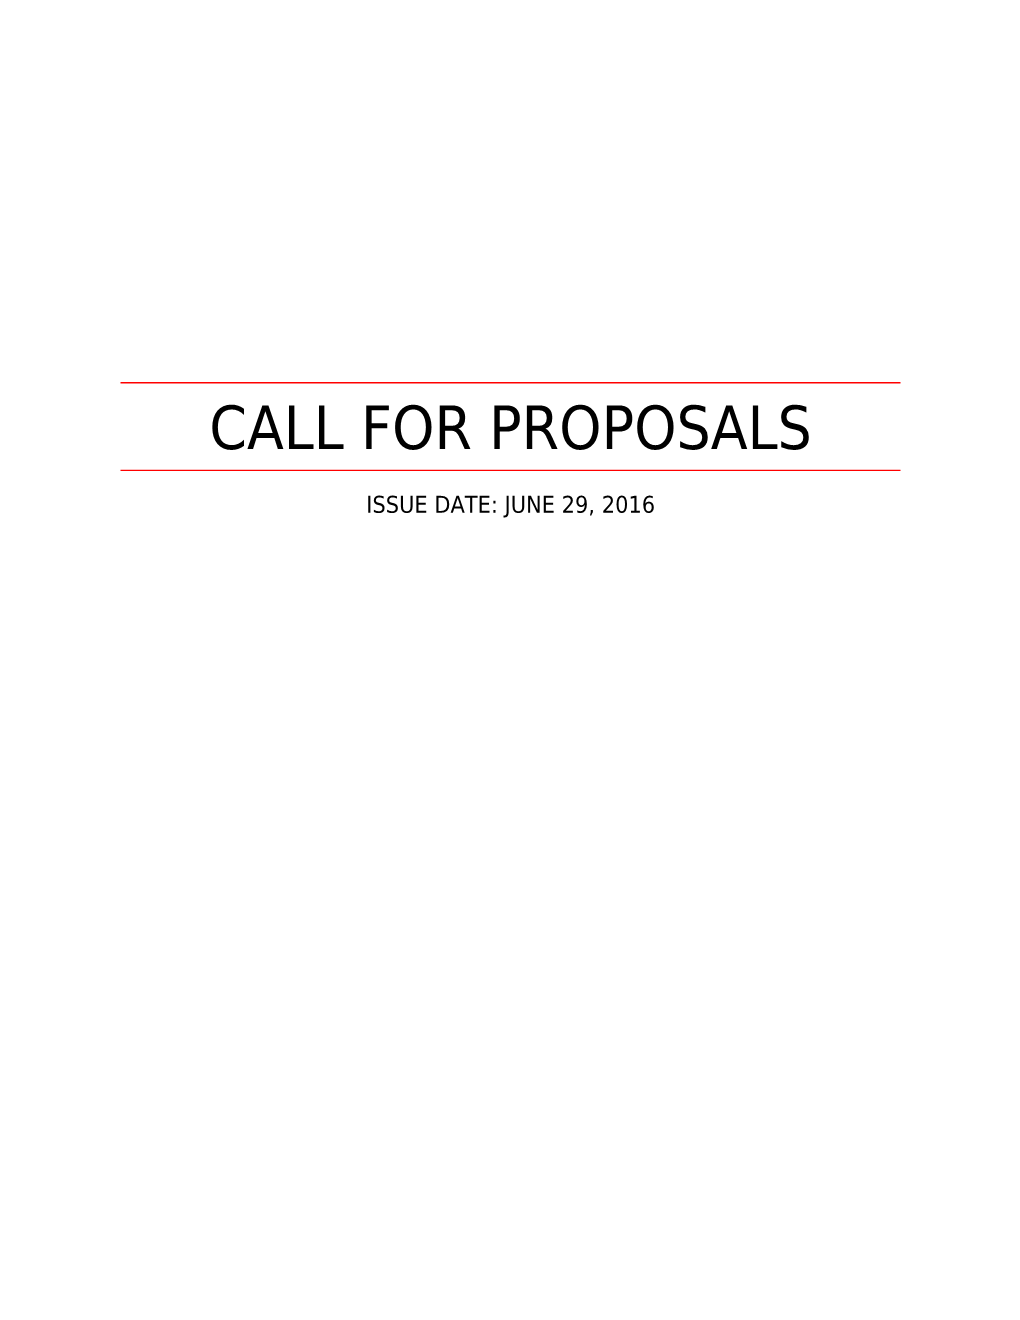 Call for Proposals s6